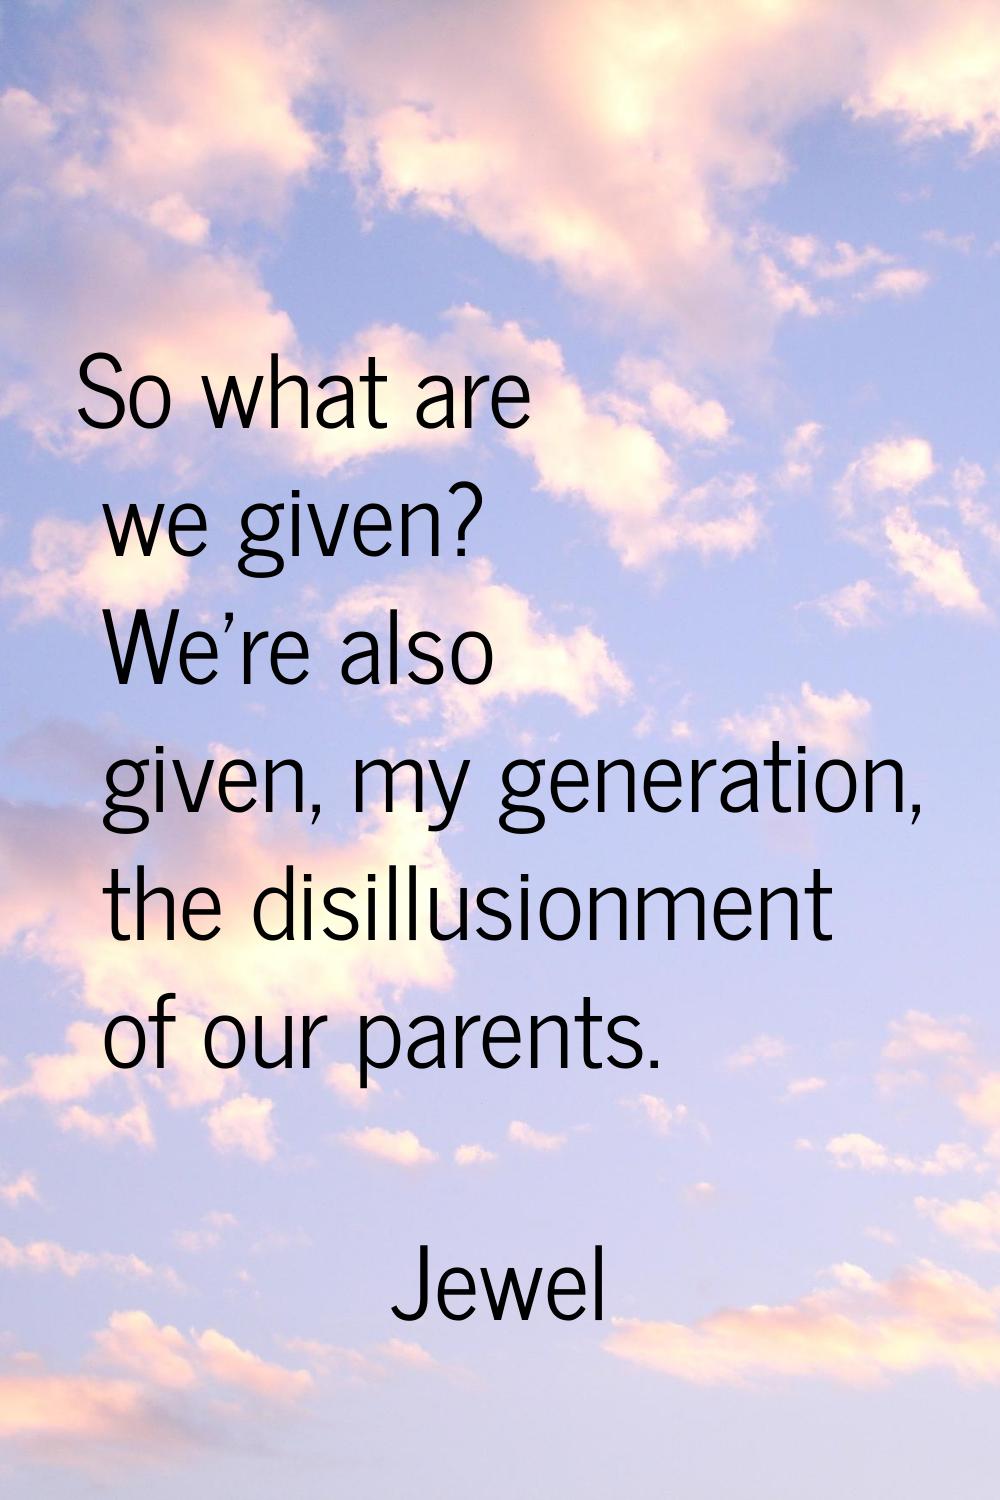 So what are we given? We're also given, my generation, the disillusionment of our parents.